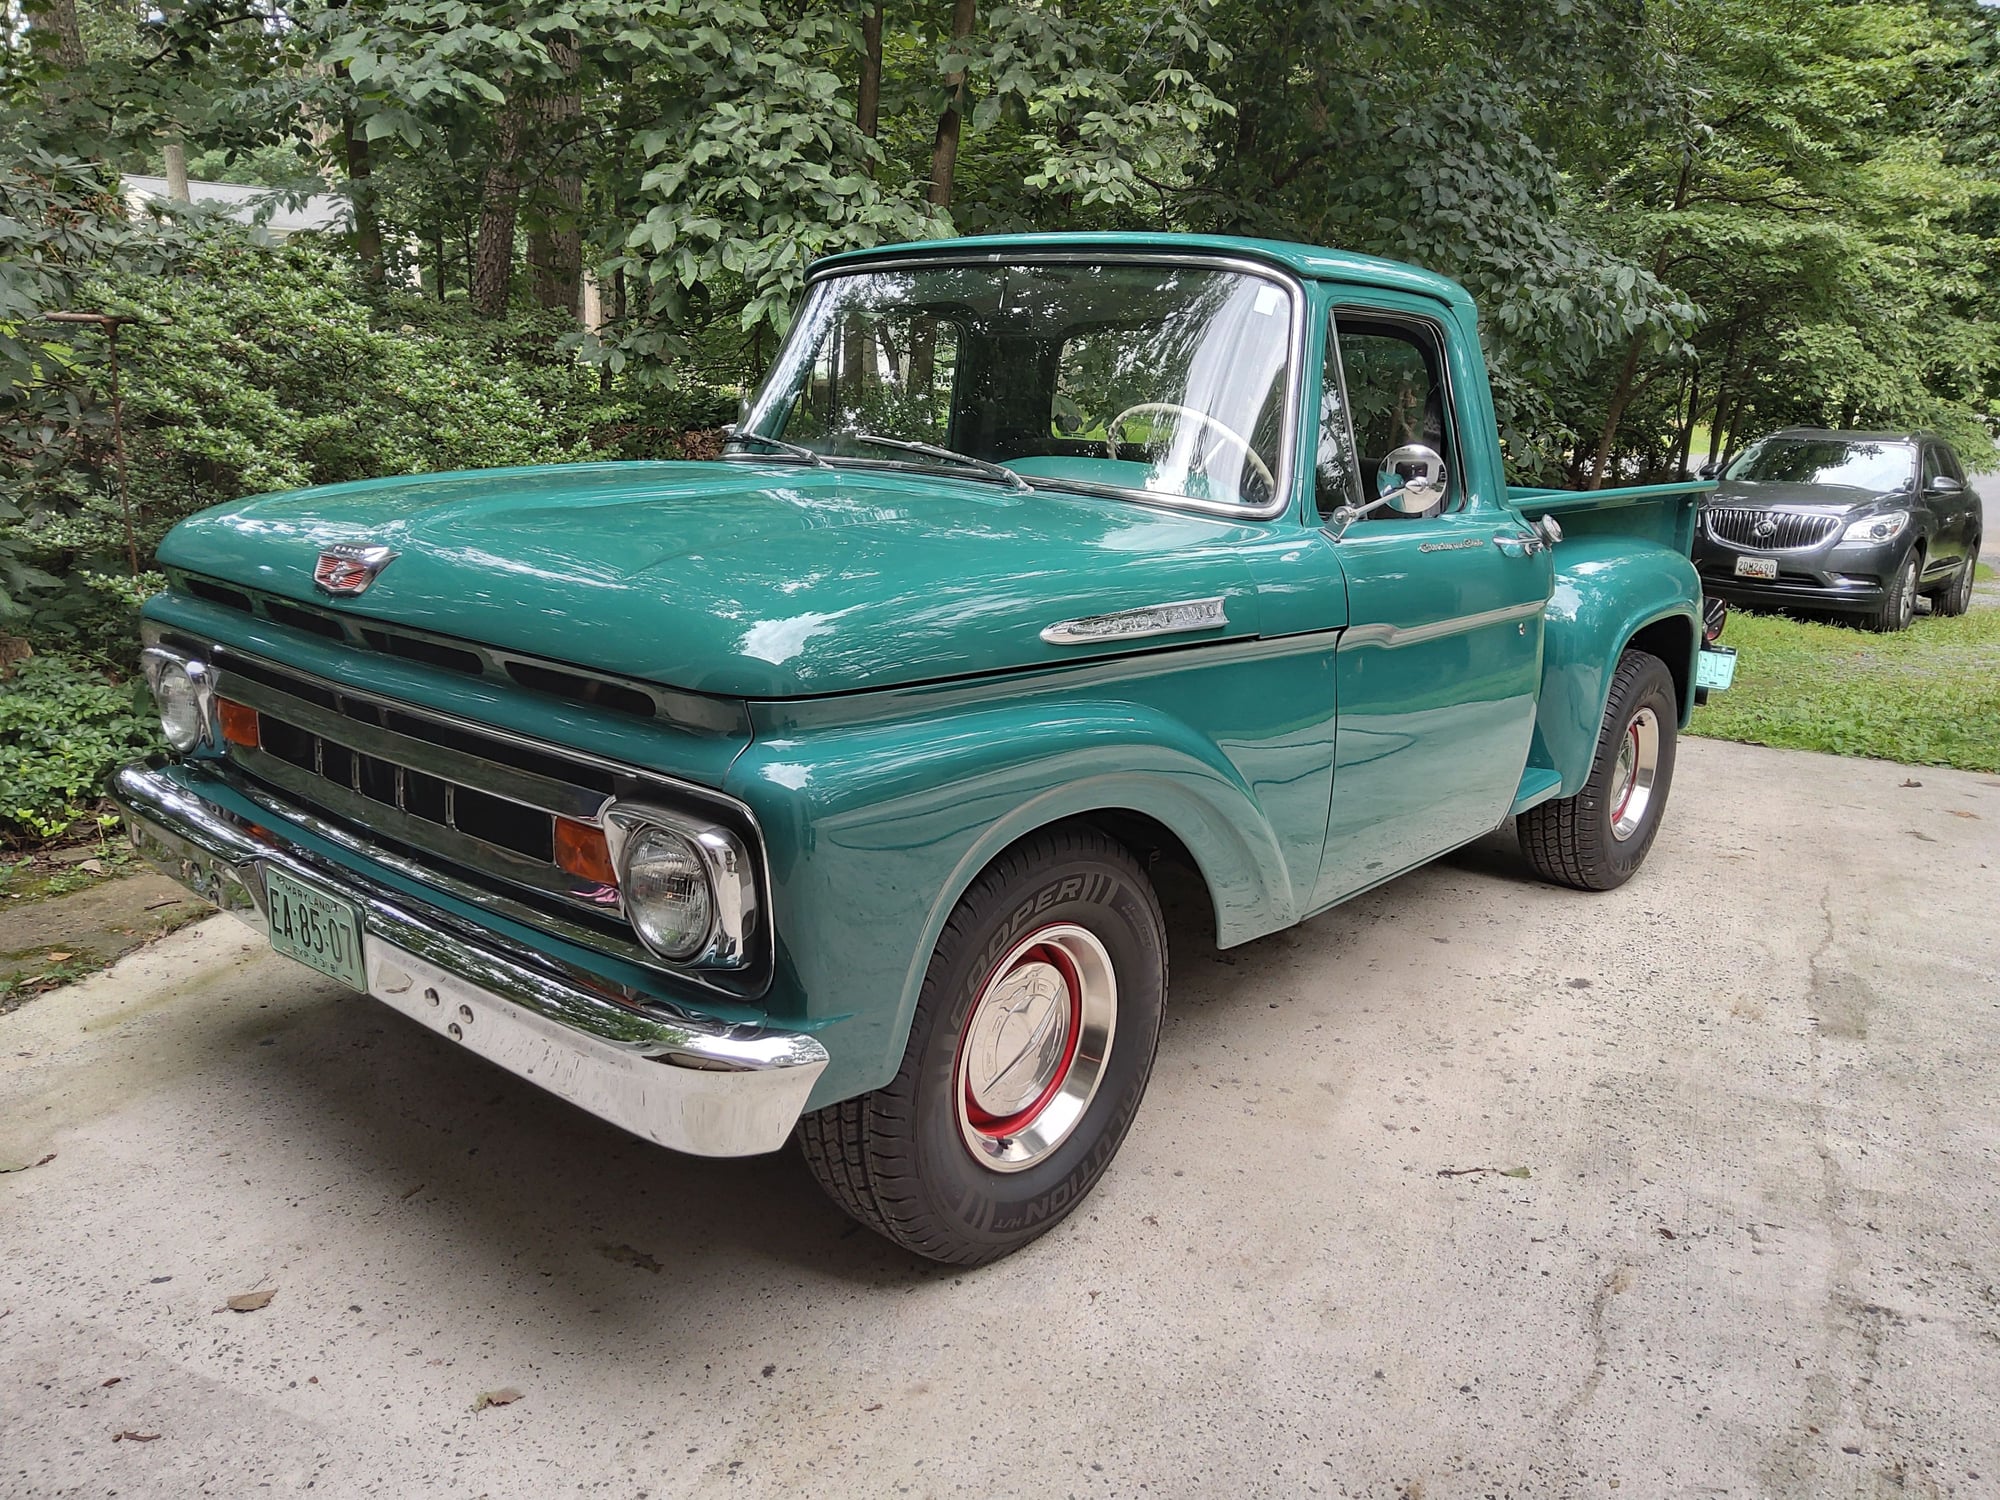 1961 Ford F-100 - Needs nothing turnkey F100 for sale - Used - VIN F10JK140008 - 60,000 Miles - 8 cyl - 2WD - Manual - Truck - Other - Monrovia, MD 21770, United States